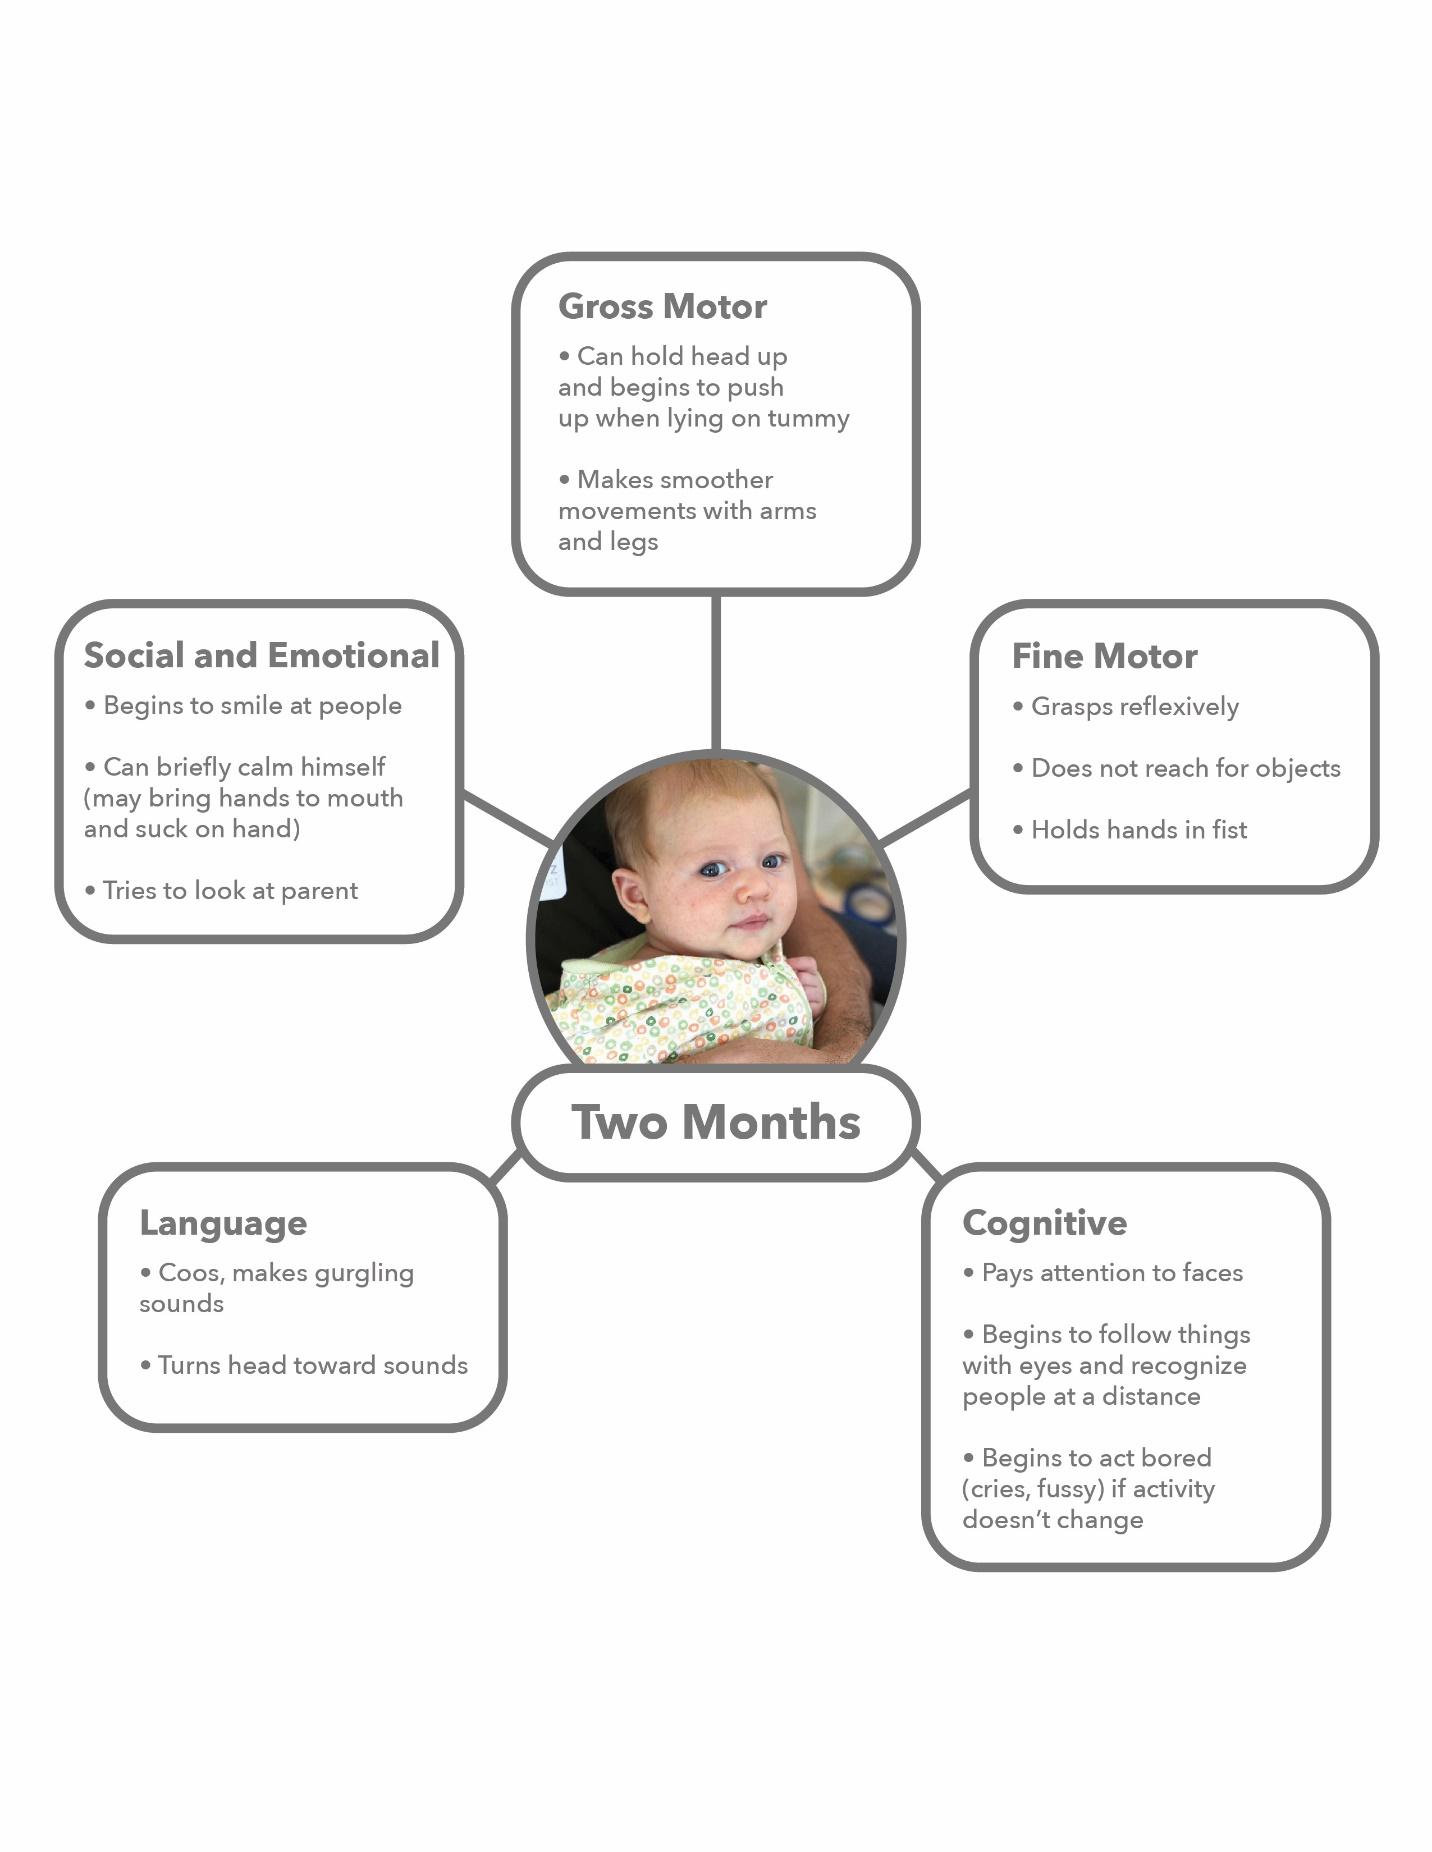 A graphic showing the develomental milestones of a two-month-old